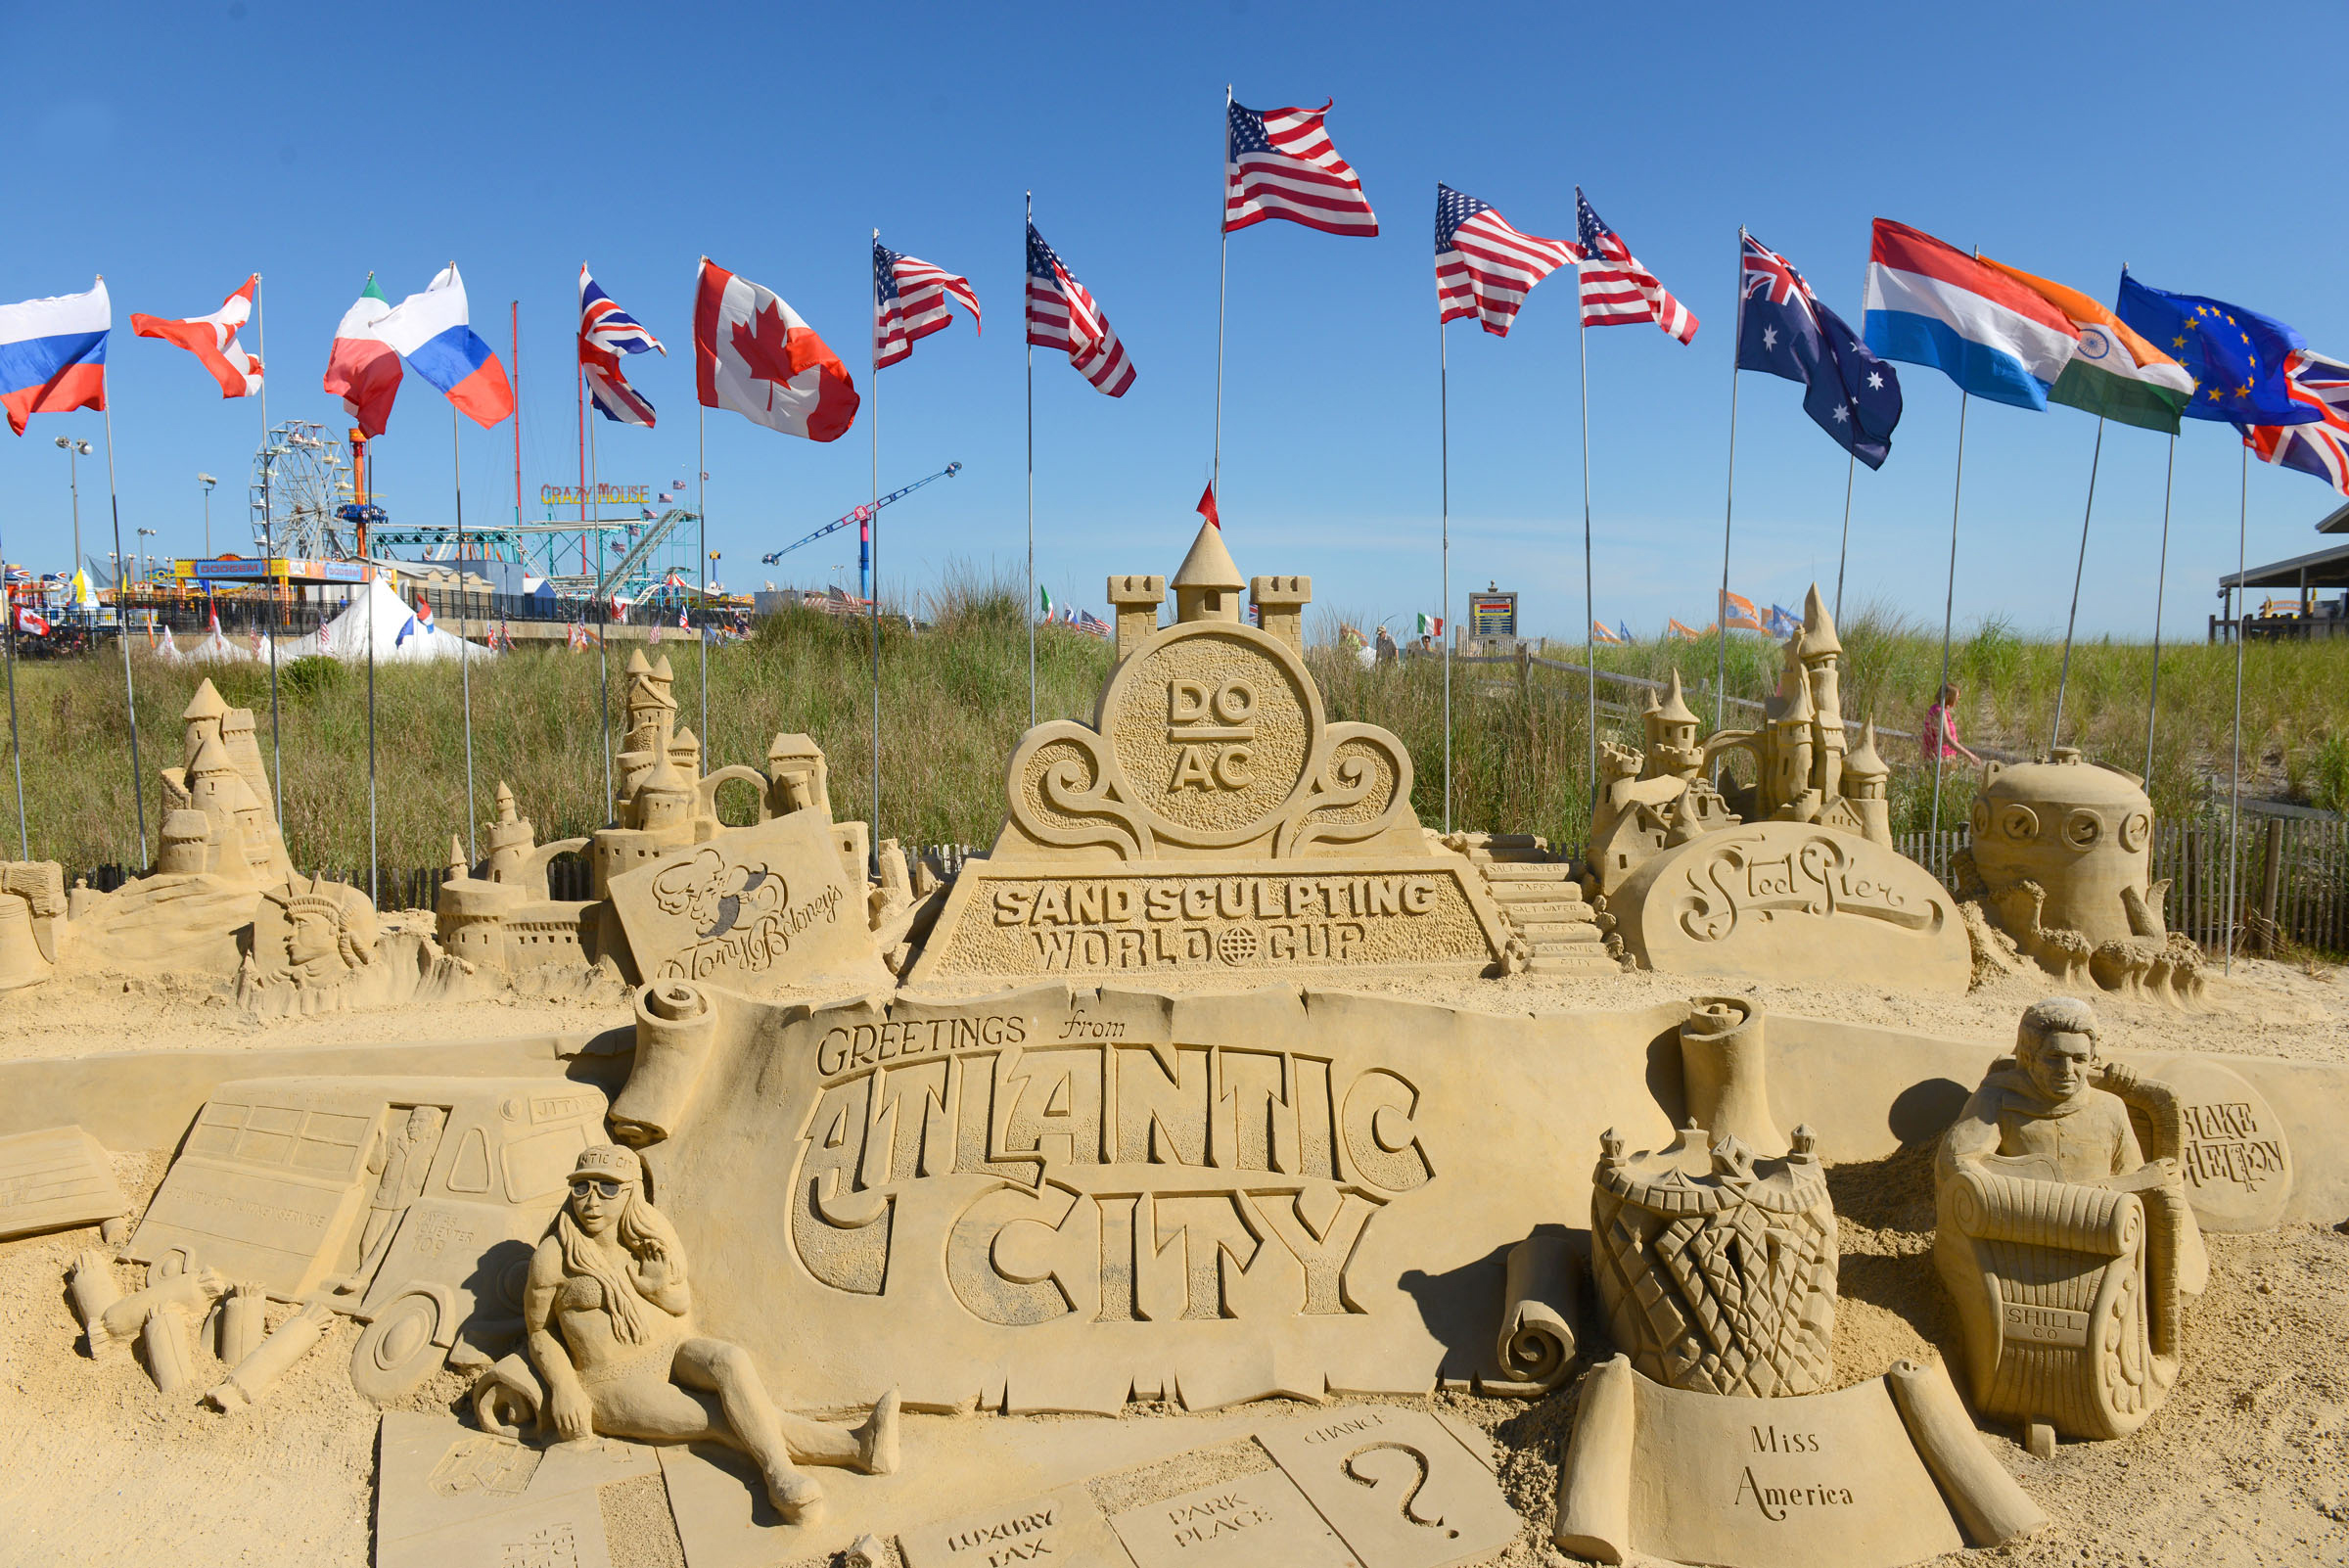 DO AC Sand Sculpting World Cup free and open to the public now through July 6 from 9 a.m. to 9 p.m. See all 30 completed works of art this July 4th weekend before they’re gone! (Peter Tobia/ACA) 